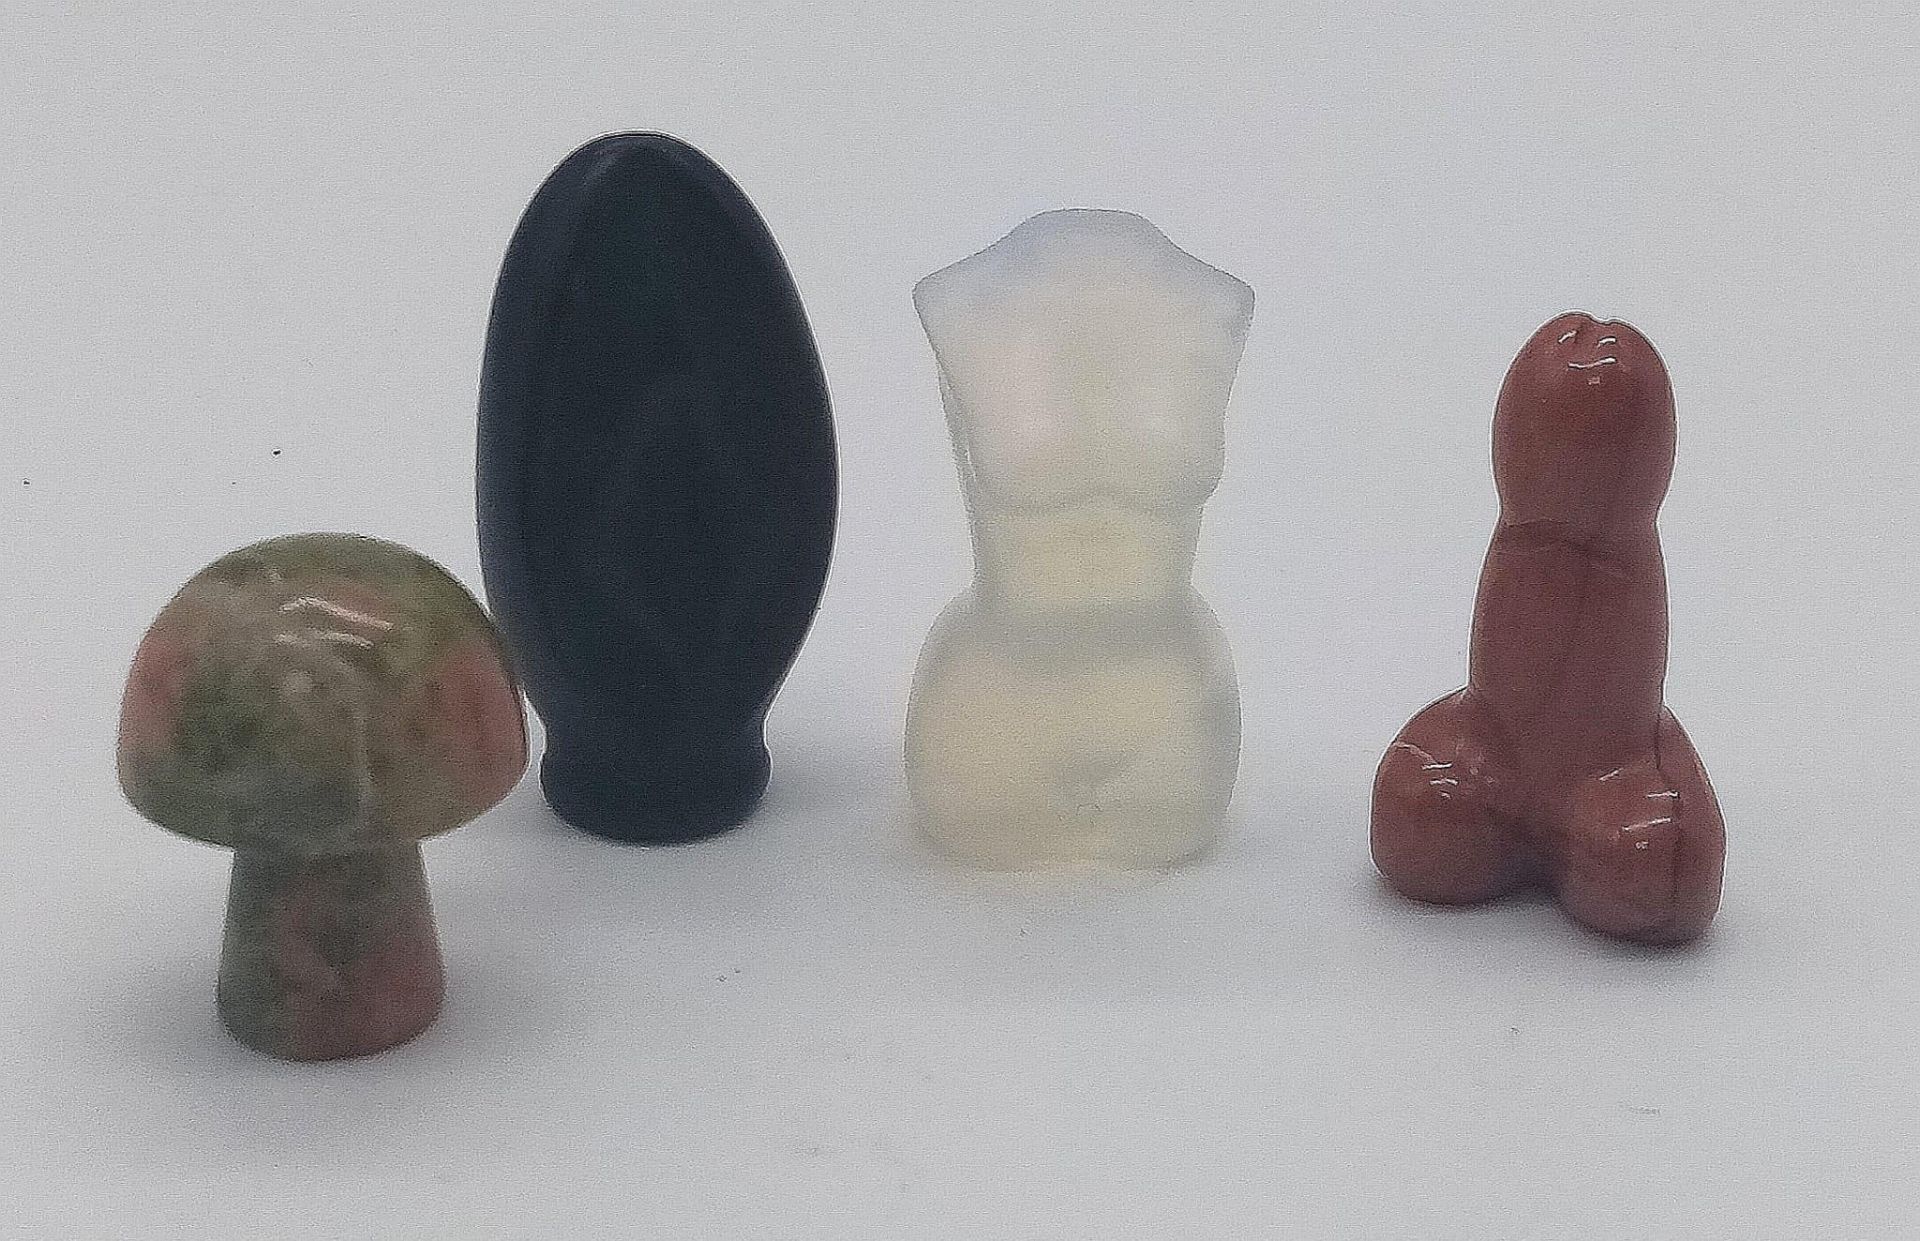 Collection of three sexual gemstone figurines...and a mushroom. Measuring between 2cm-4cm in length. - Image 2 of 3